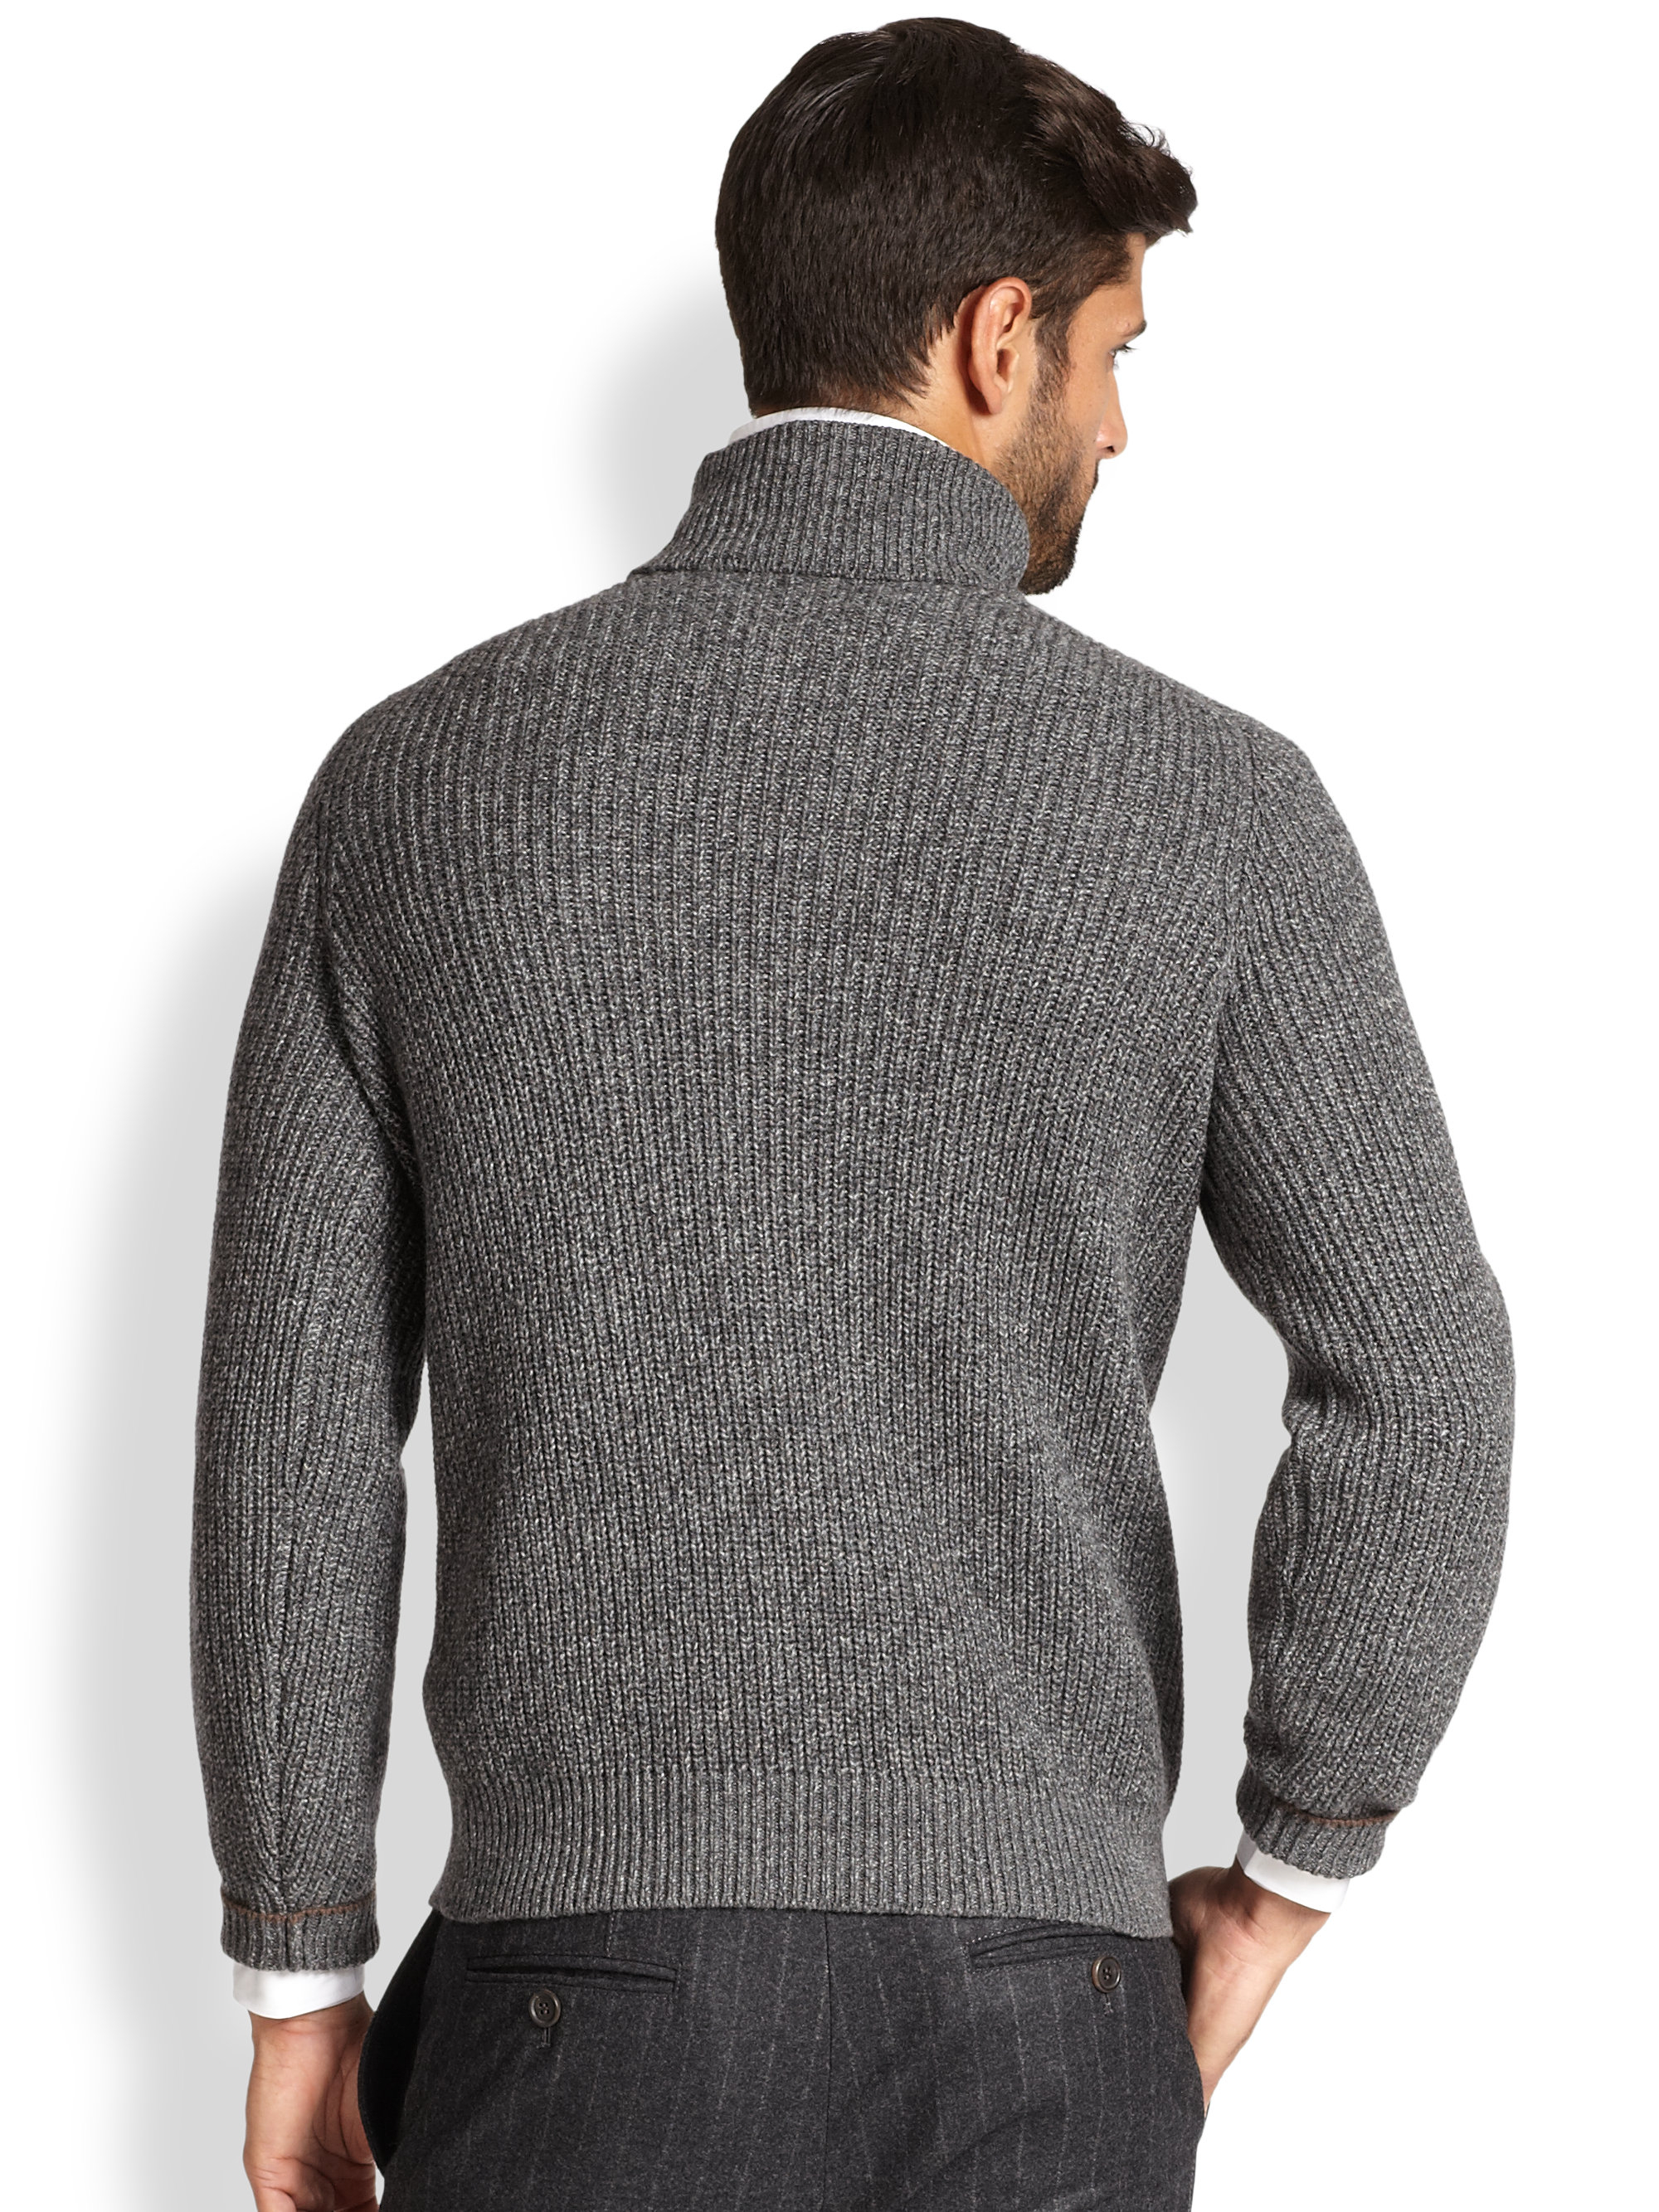 Lyst - Brunello Cucinelli Marled Cashmere Chunky Turtleneck Sweater in ...